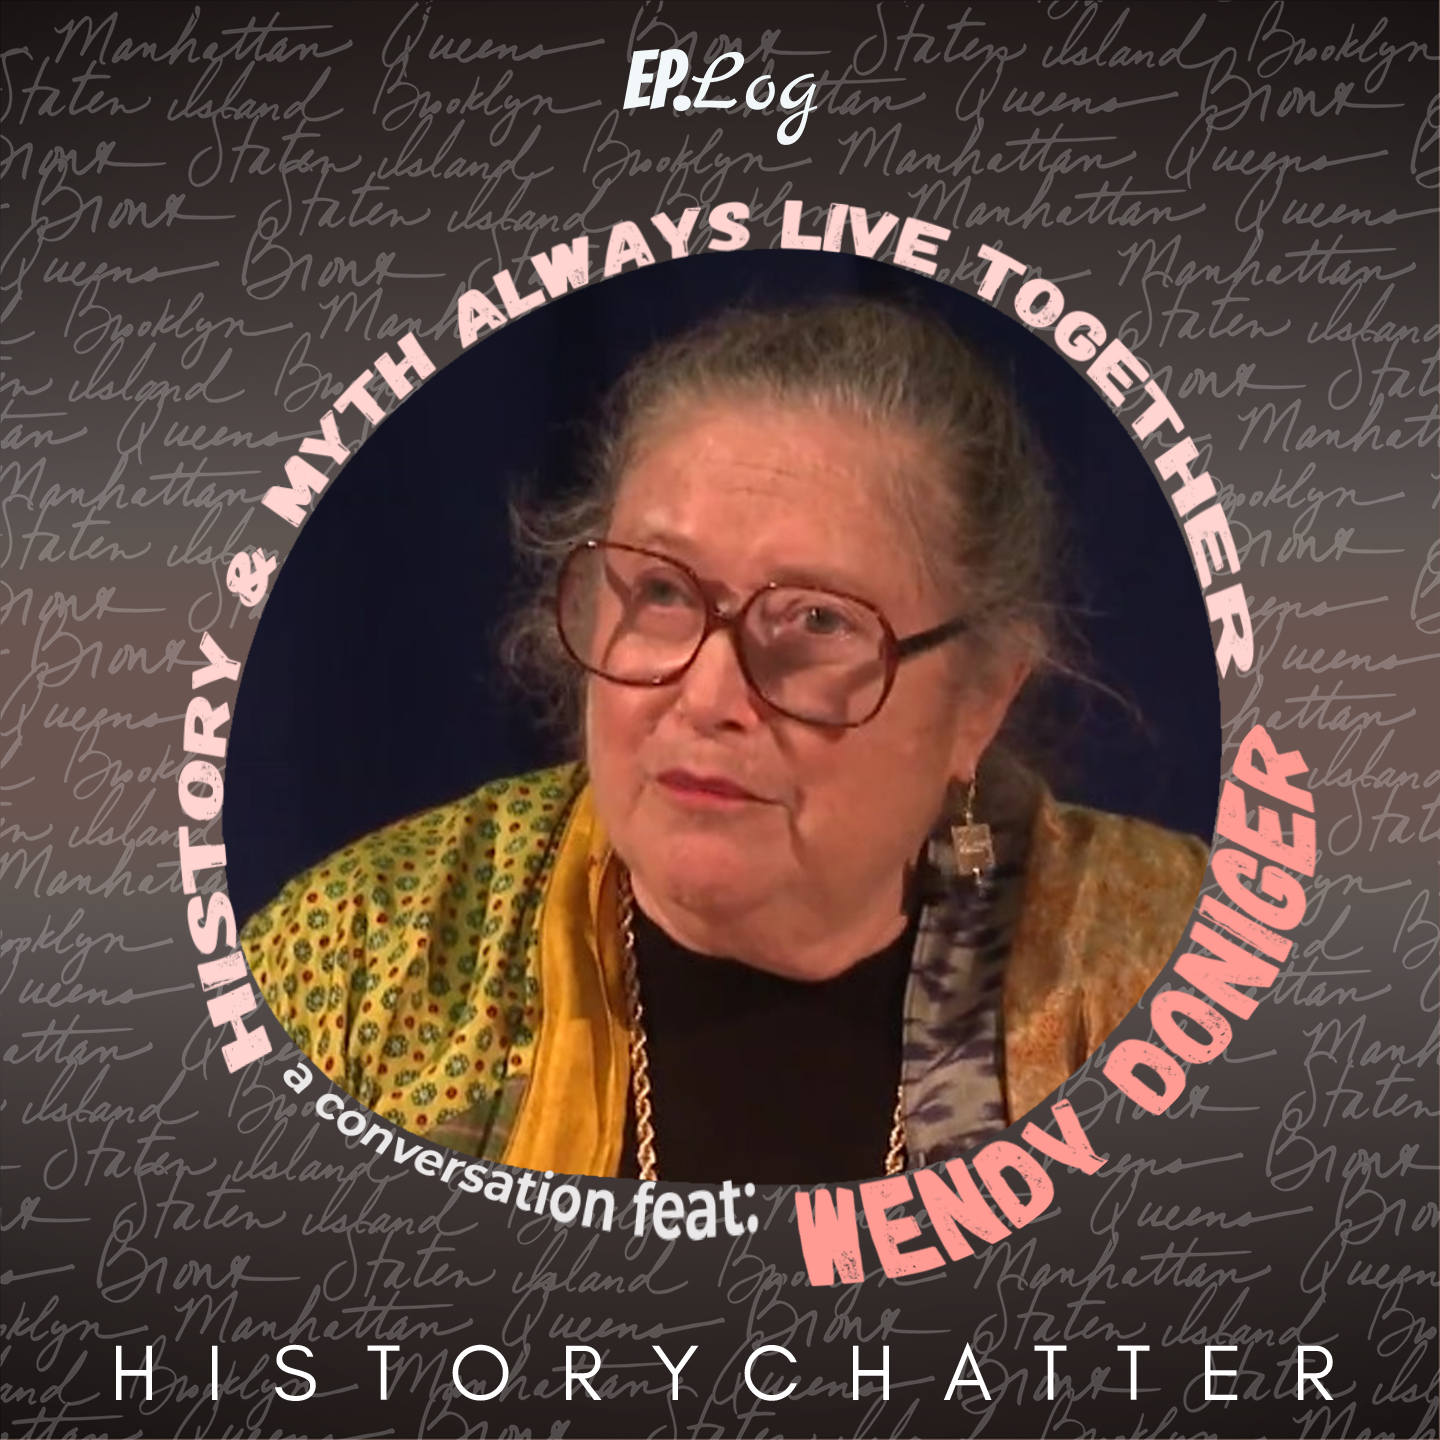 History and myth always live together: a conversation with Wendy Doniger